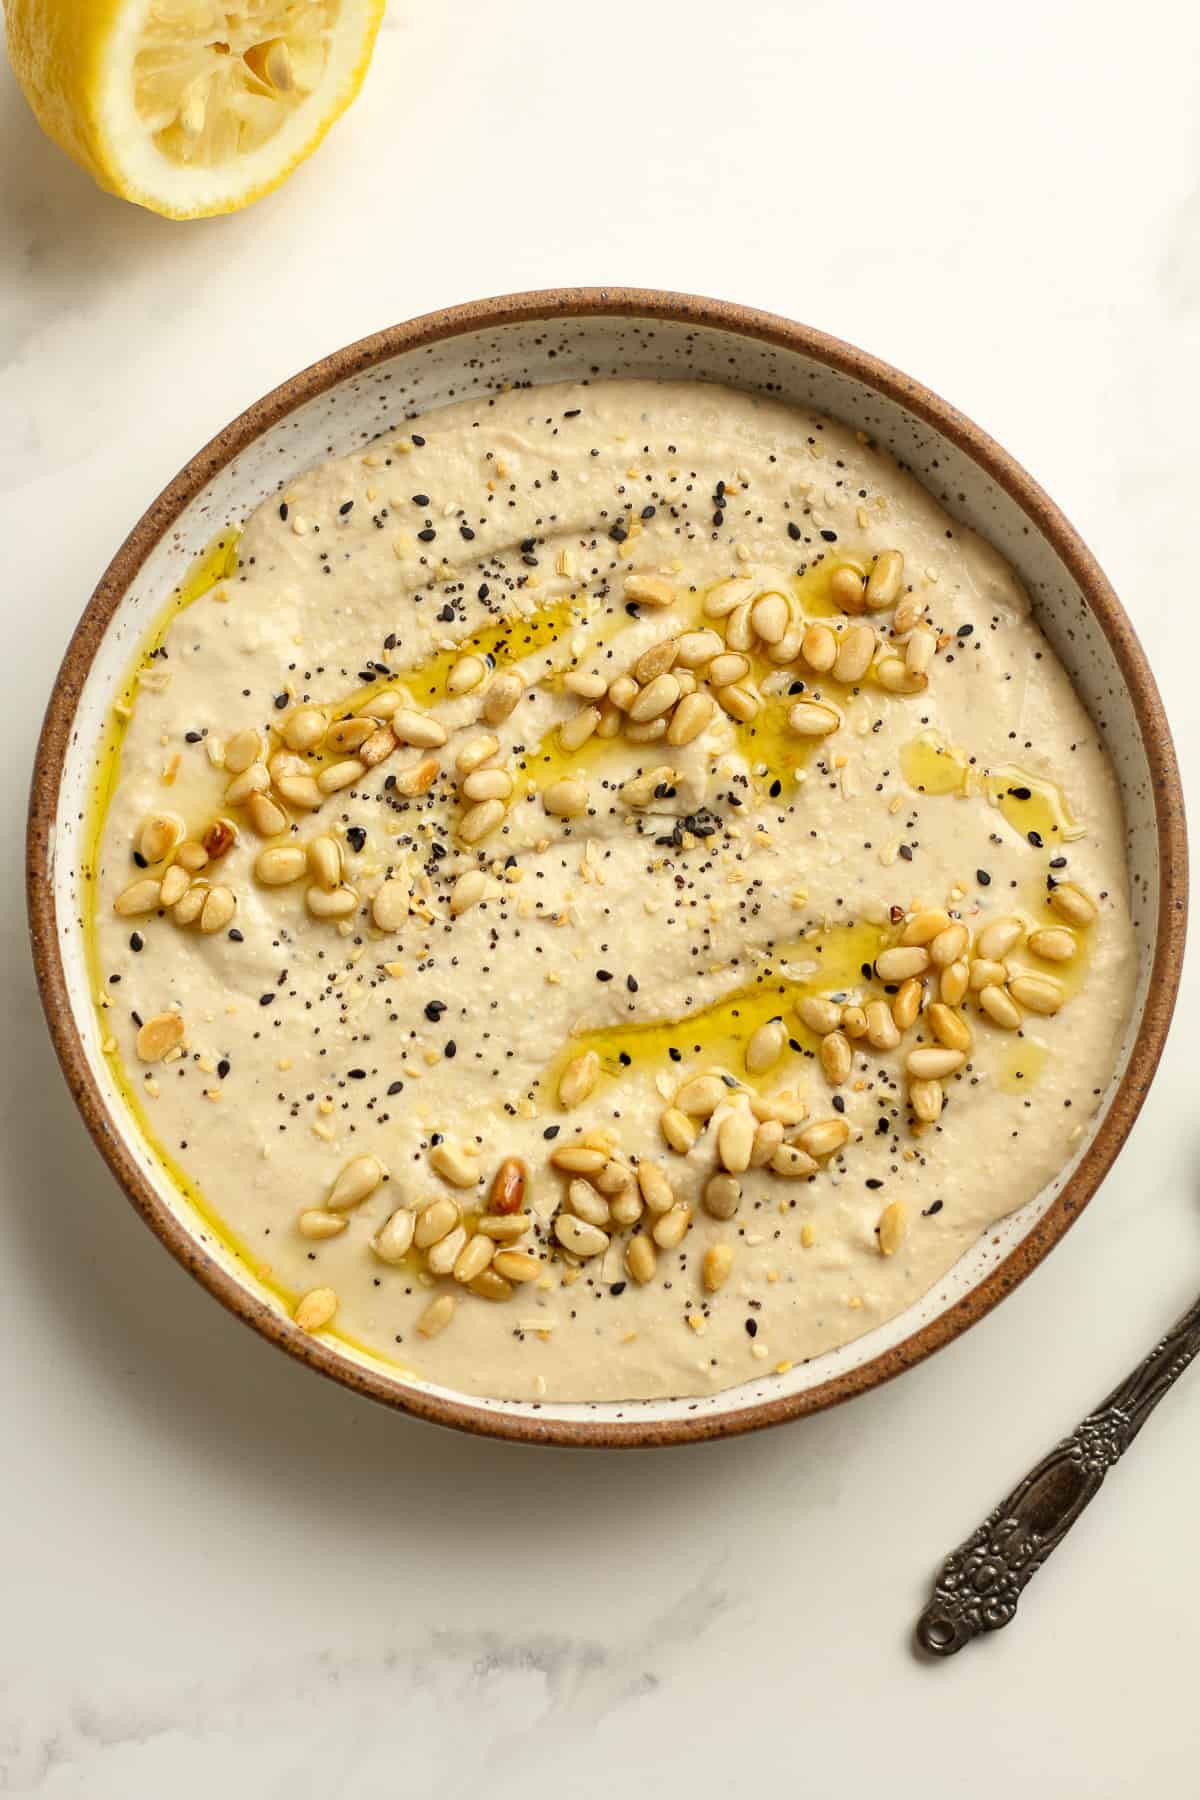 A bowl of the creamy hummus, with pine nuts on top.